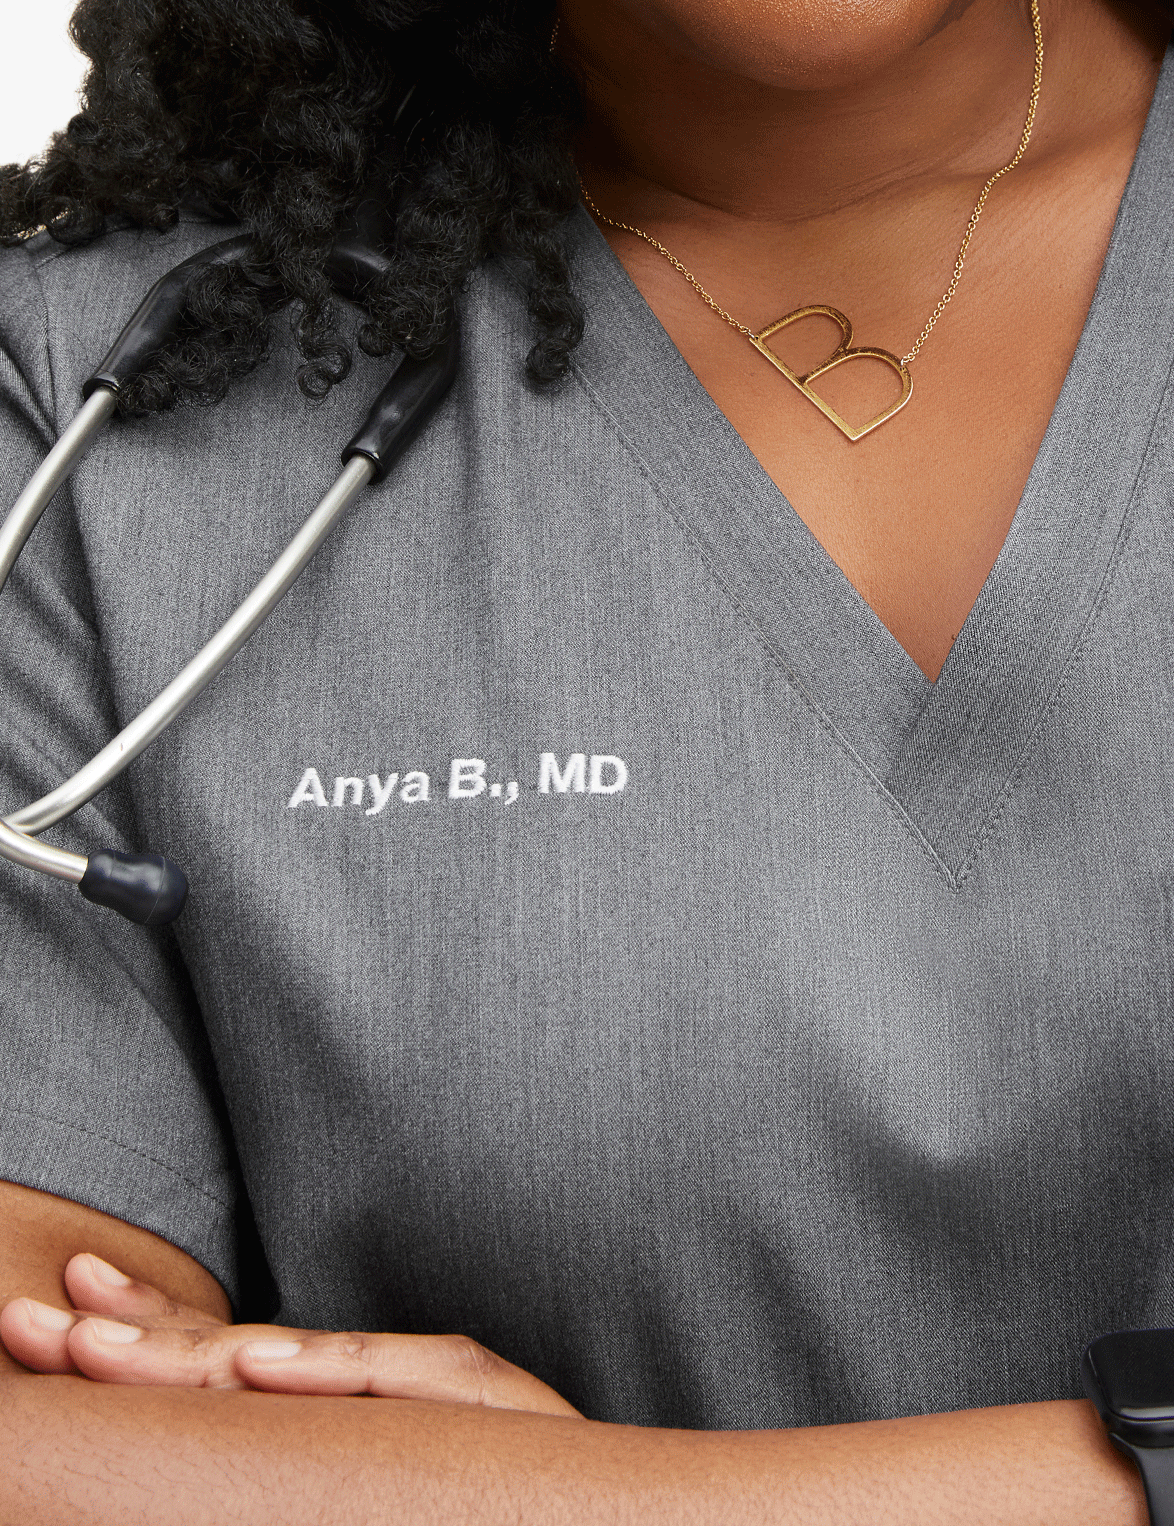 YOU CALL IT SUTURES, WE CALL IT EMBROIDERY — Make awesome scrubs even more awesome with a personalized touch.